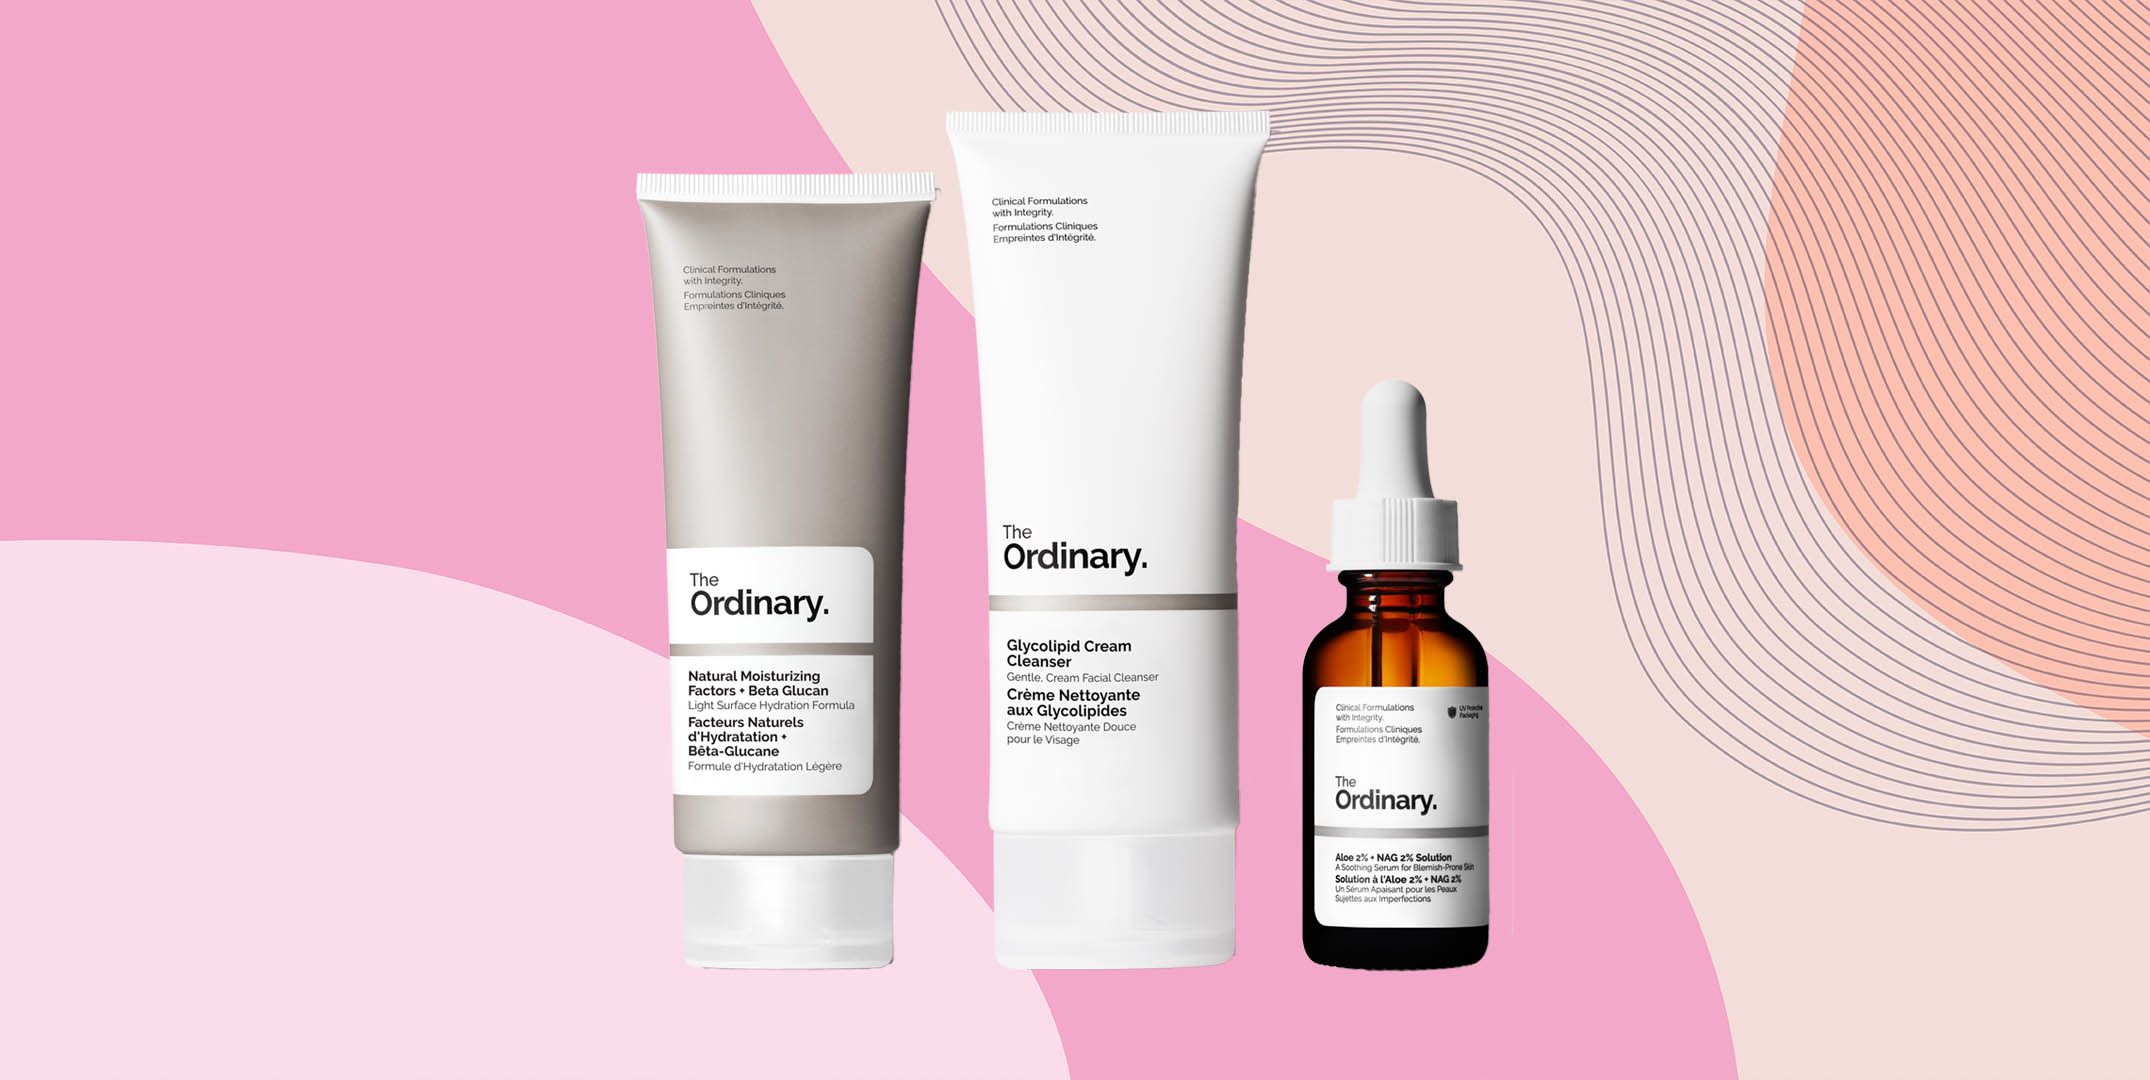 What To Buy From The Ordinary Best Routine For Every Skin Type image pic